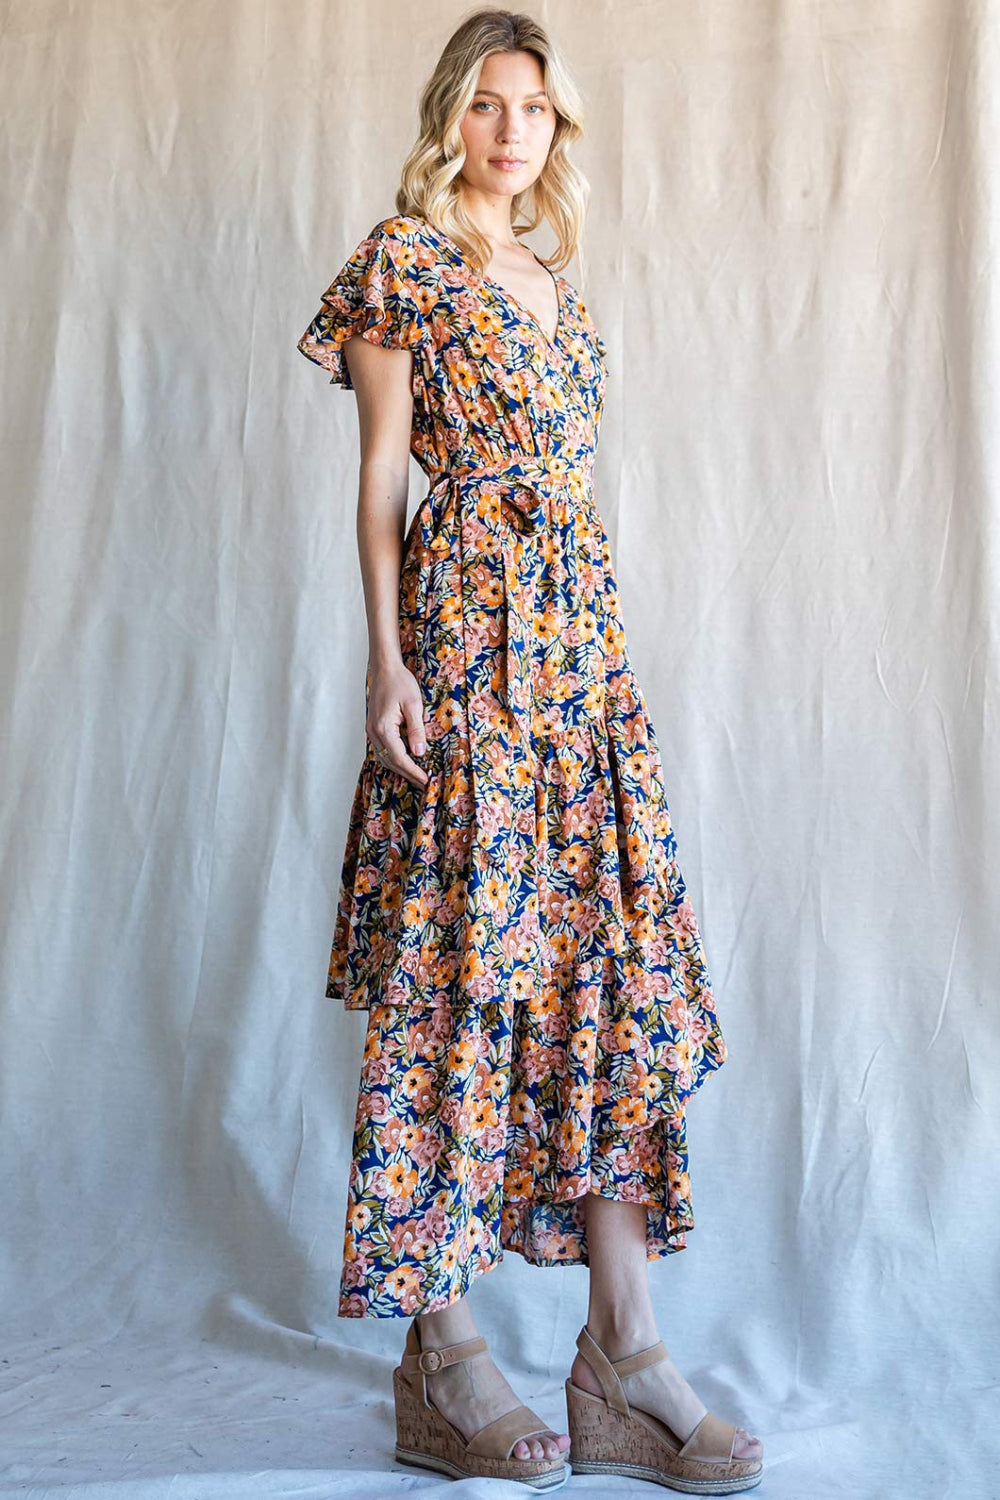 Cotton Bleu by Nu Label Floral Ruffled Midi Dress - Three Bears Boutique